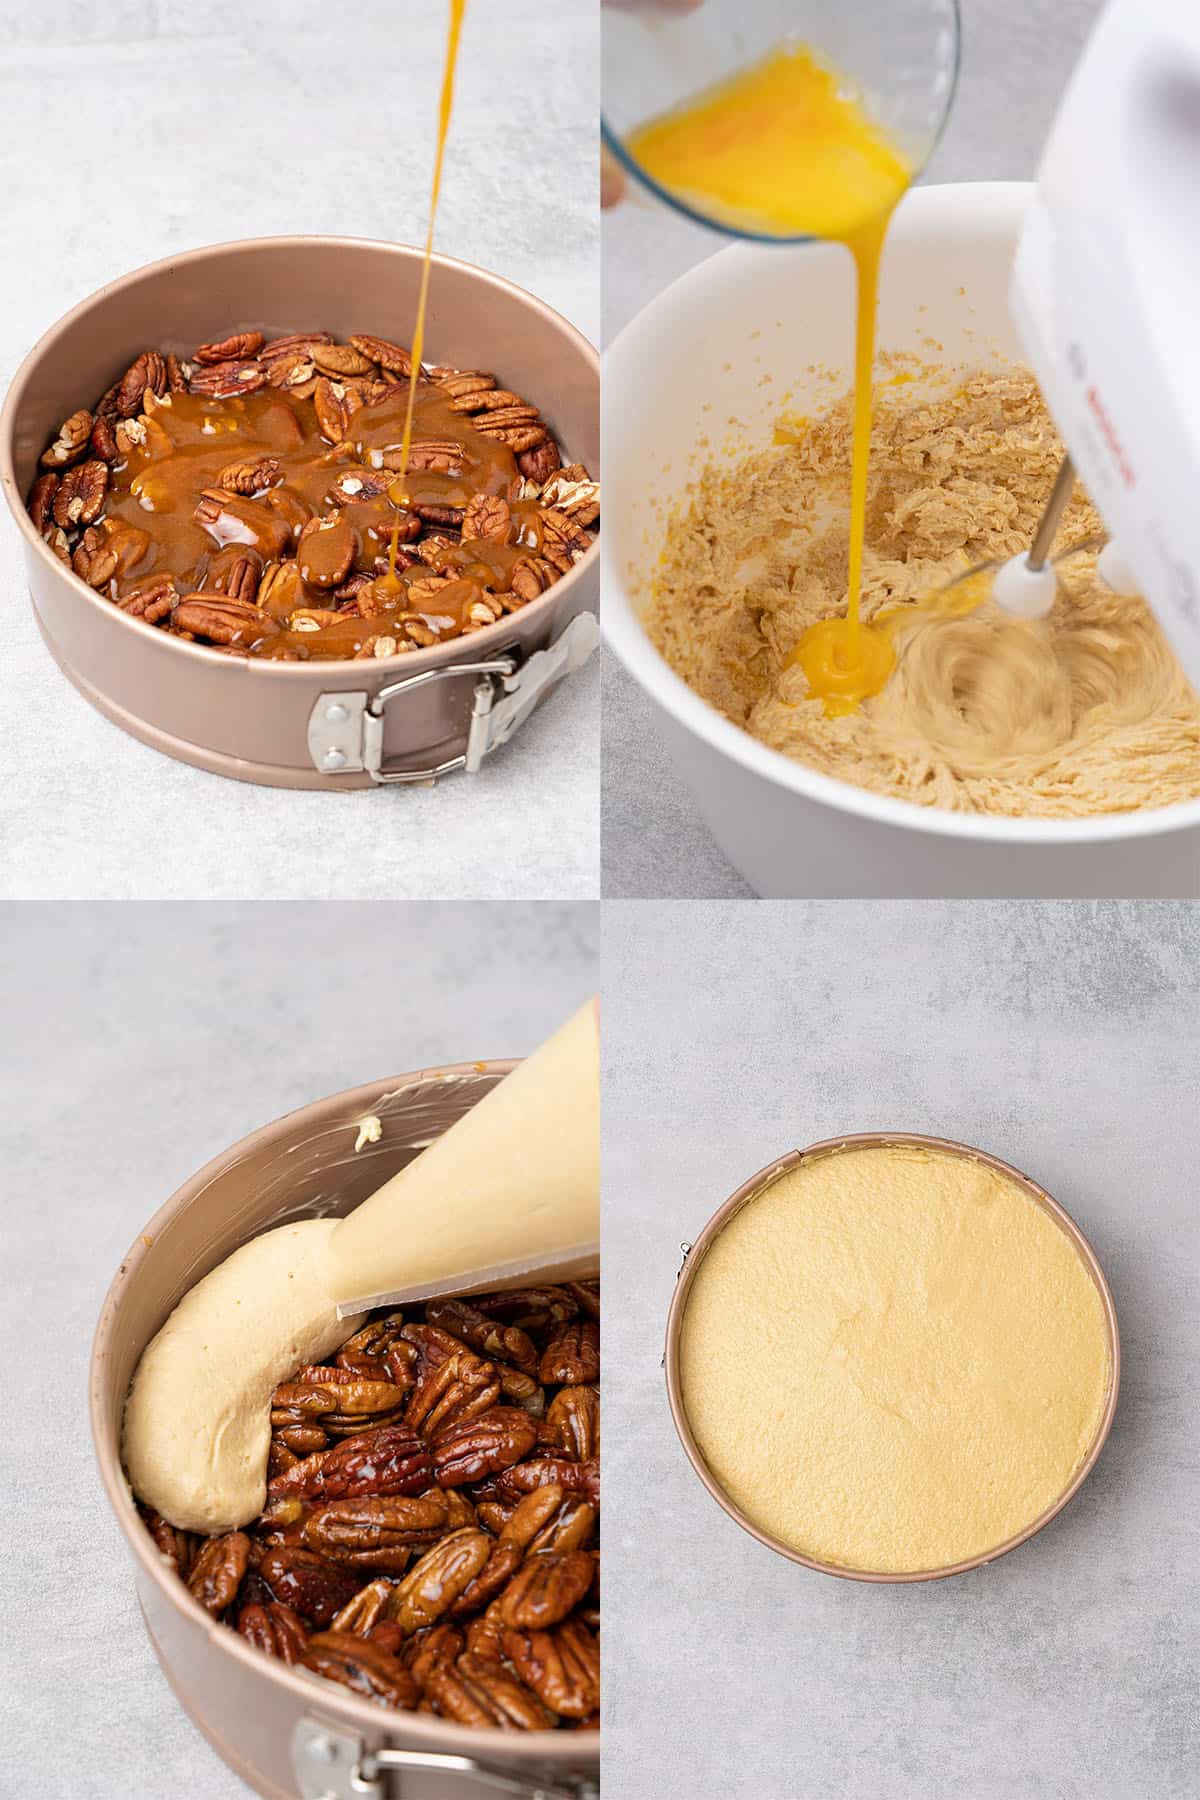 Step-by-step assembly of the pecan upside down cake.